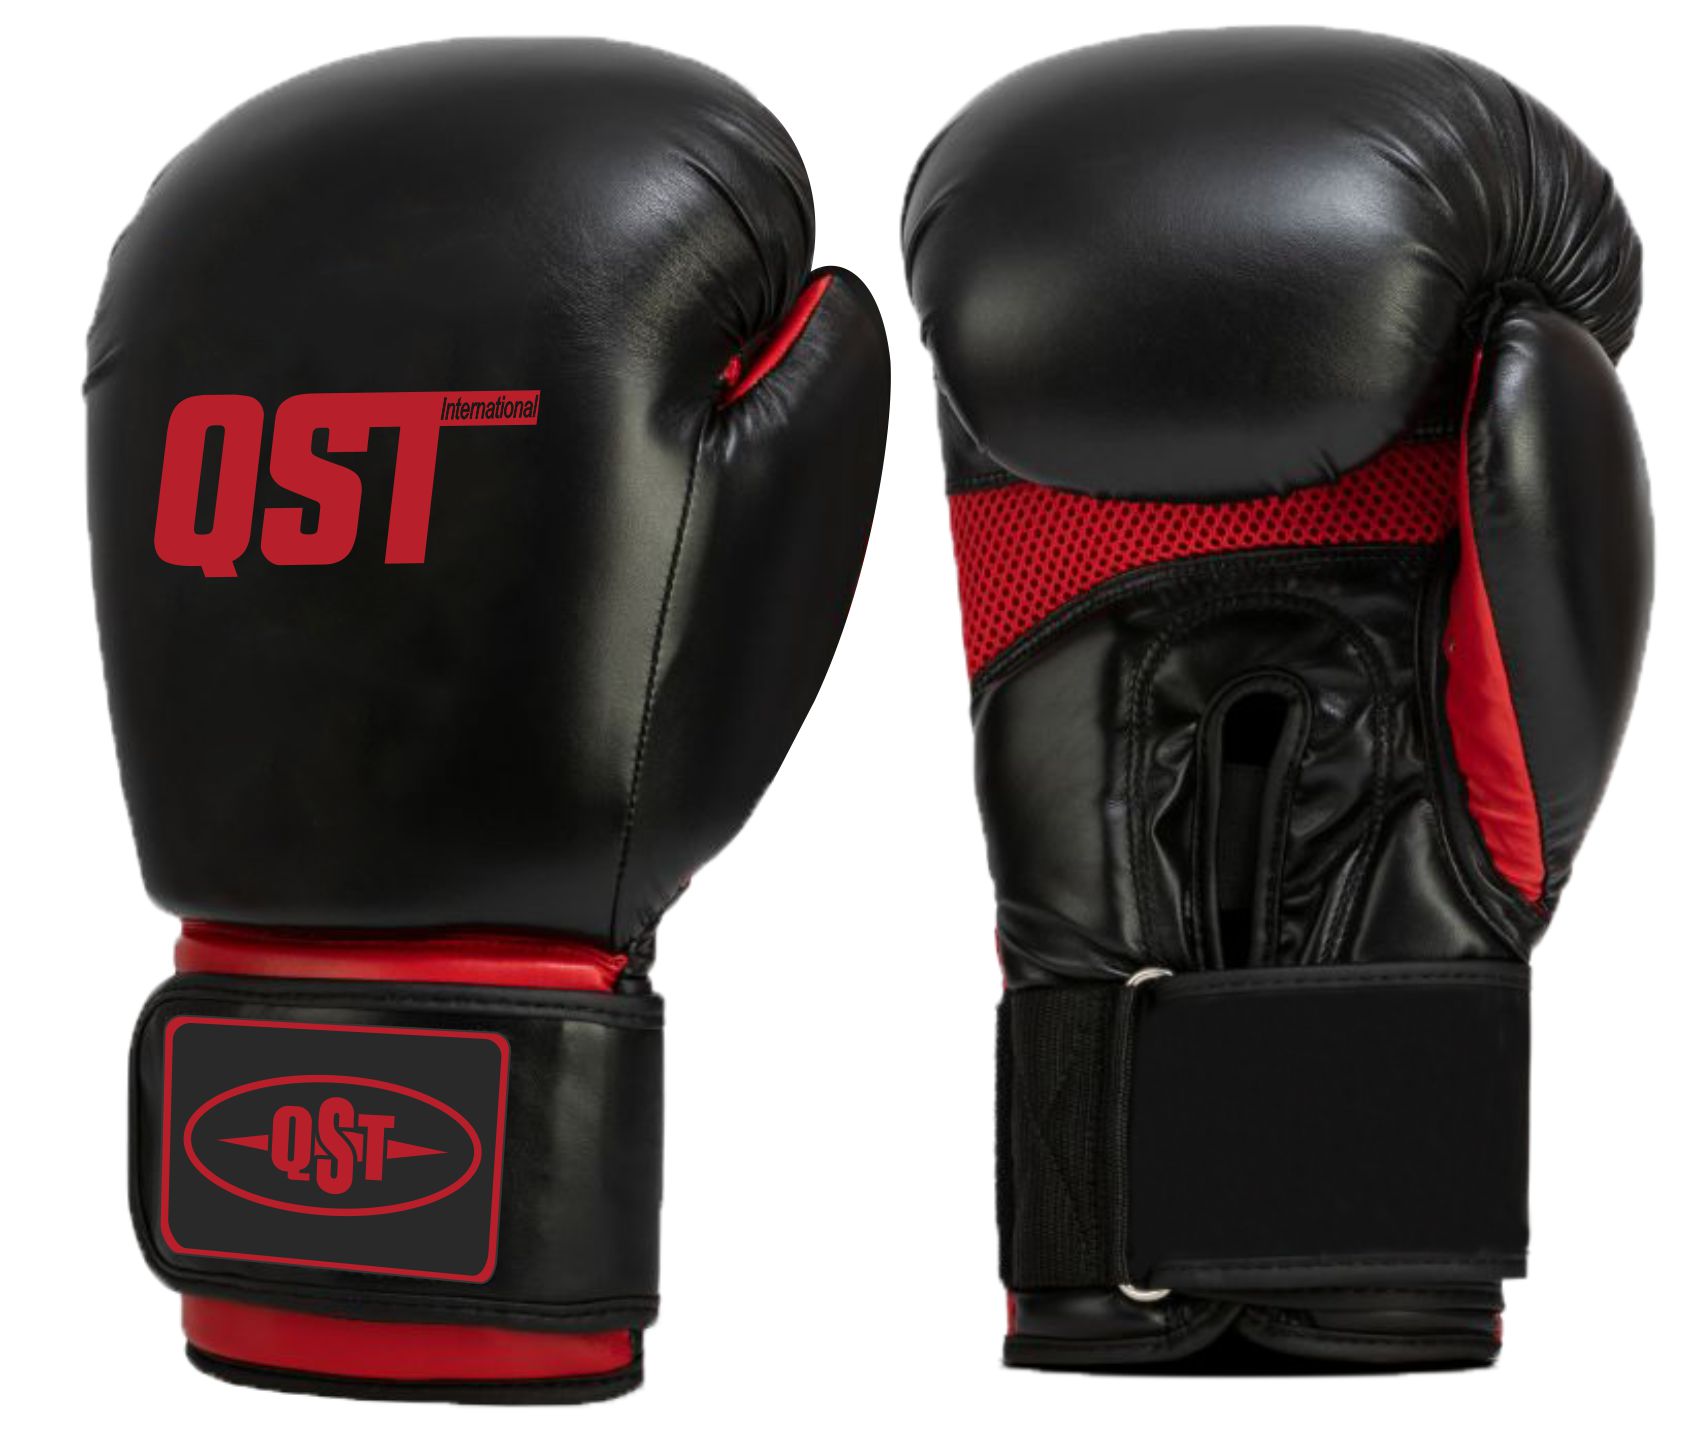 Professional Boxing Gloves - PRG-1513